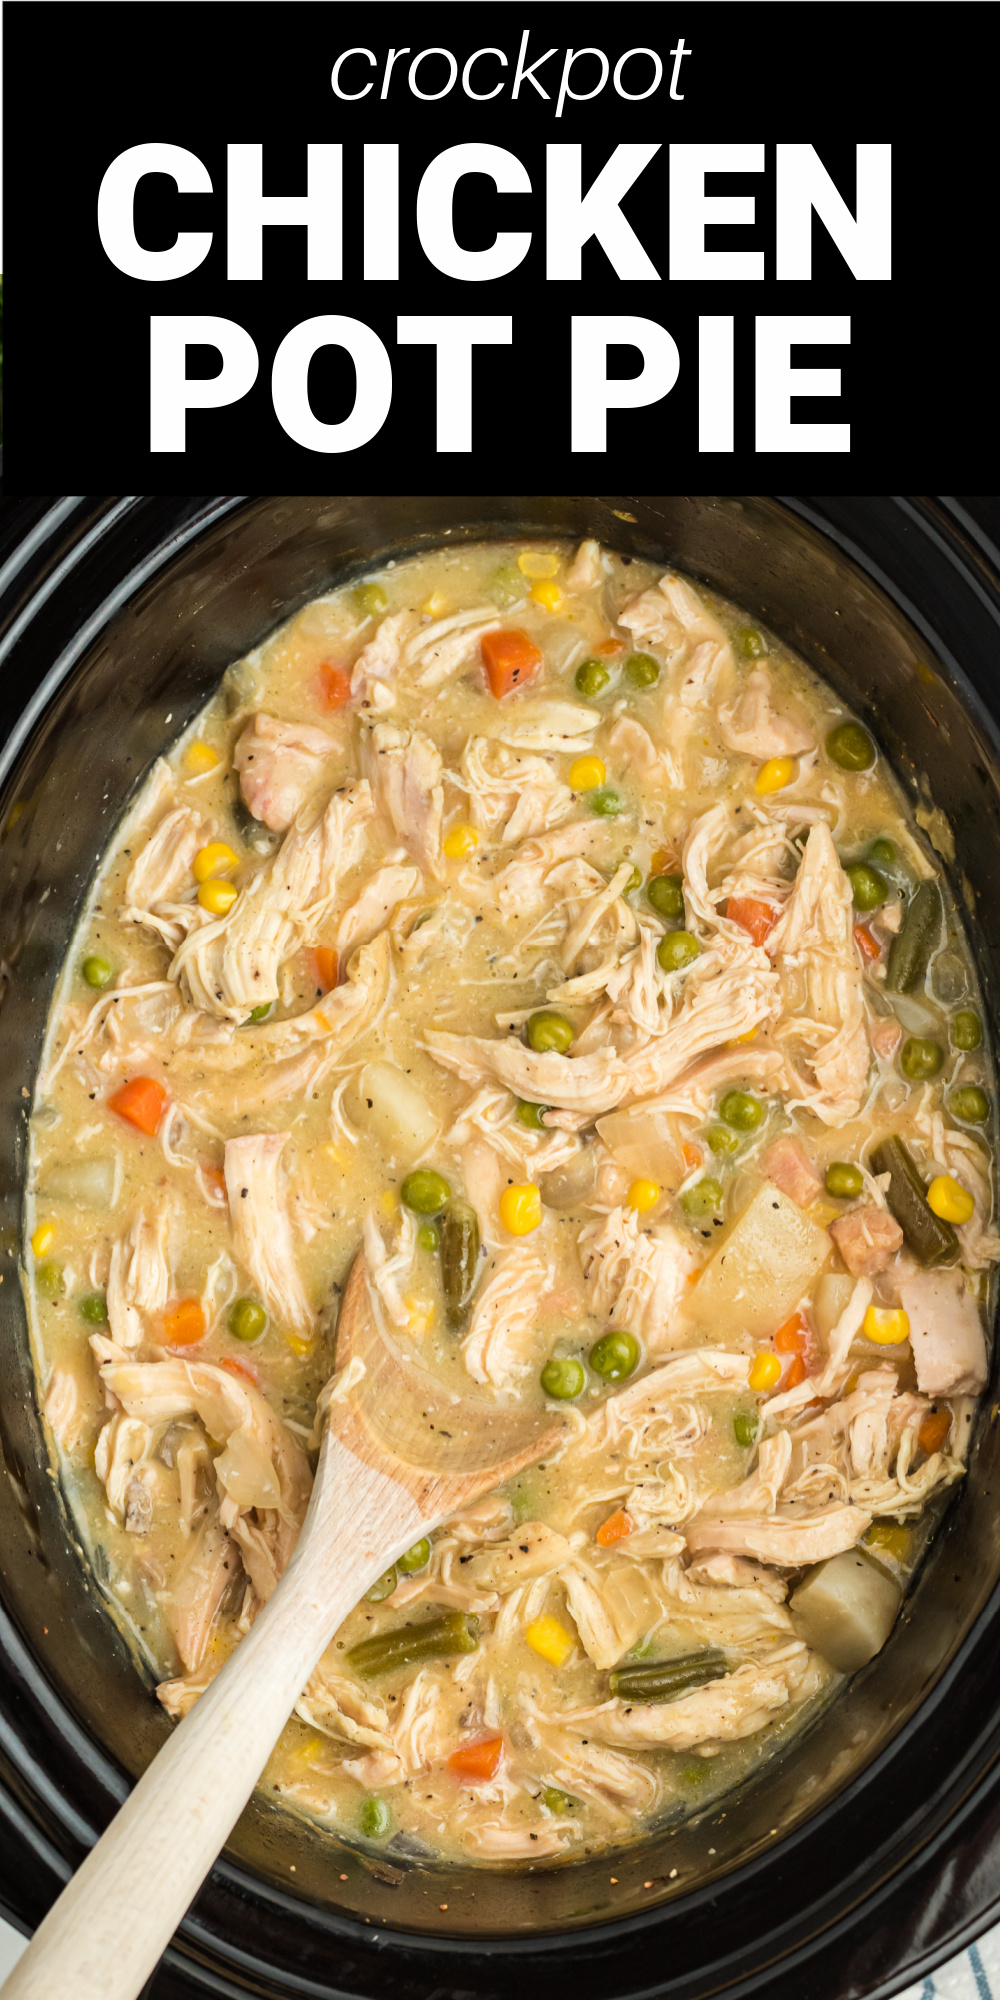 This Crockpot Chicken Pot Pie is a fast and simple way to make a hearty meal the whole family loves. The chicken is perfectly baked in a creamy sauce with healthy vegetables and topped with buttery biscuits. It literally makes itself in the crockpot.